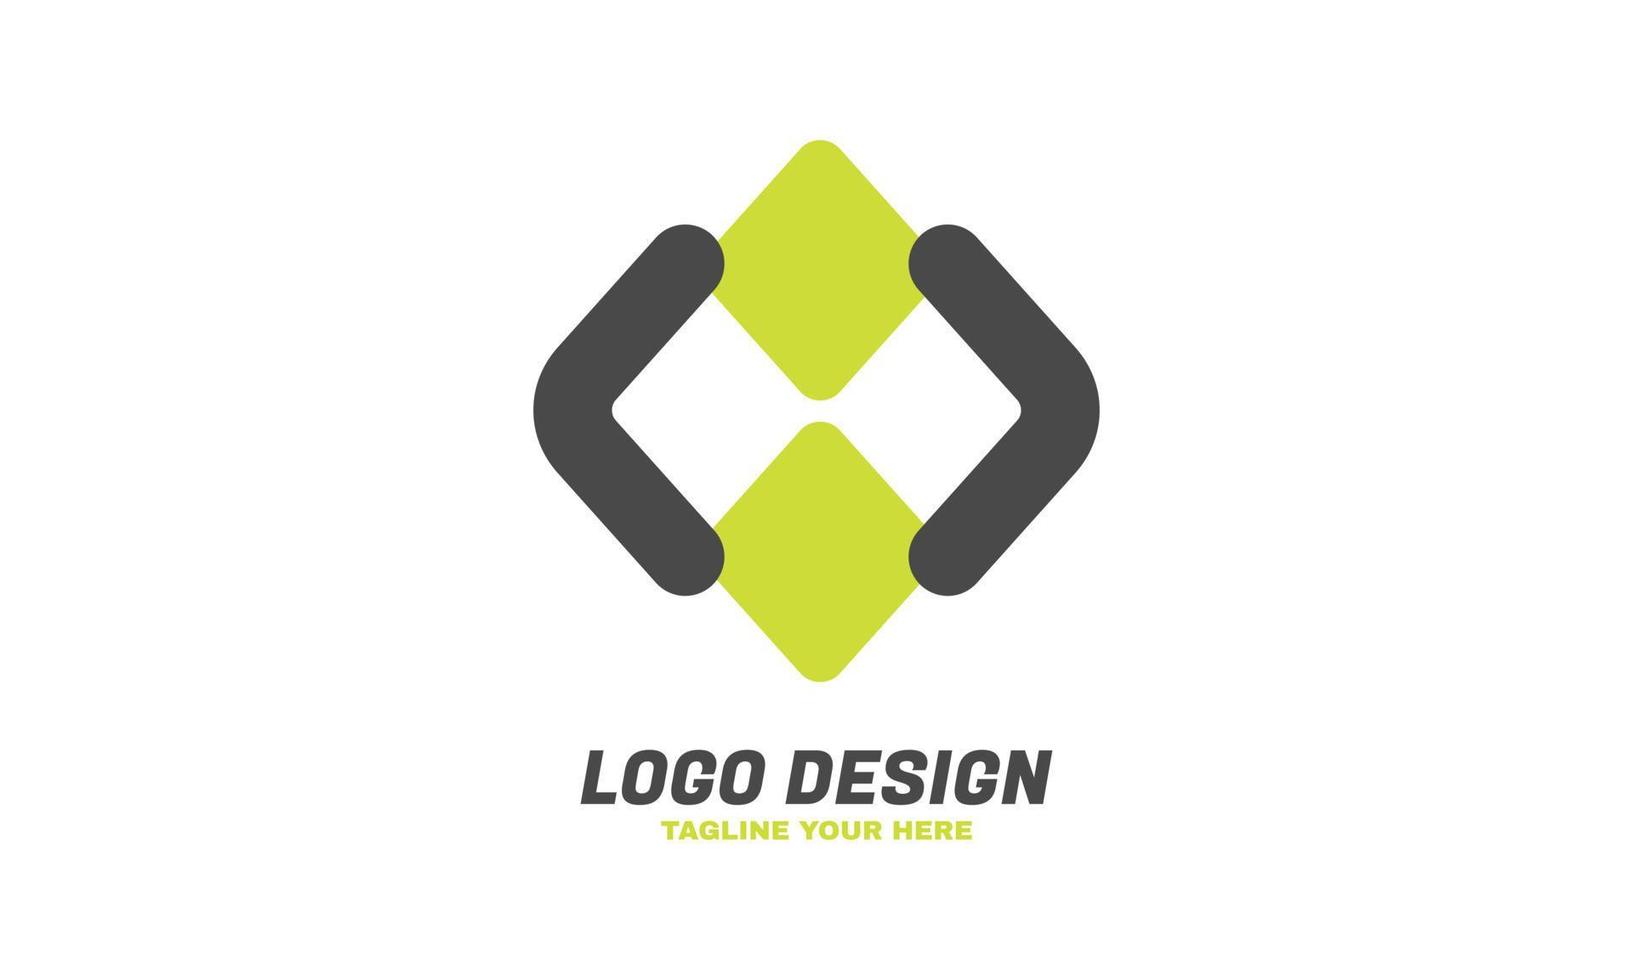 Abstract business company logo Corporate identity design element distribution logotype design vector